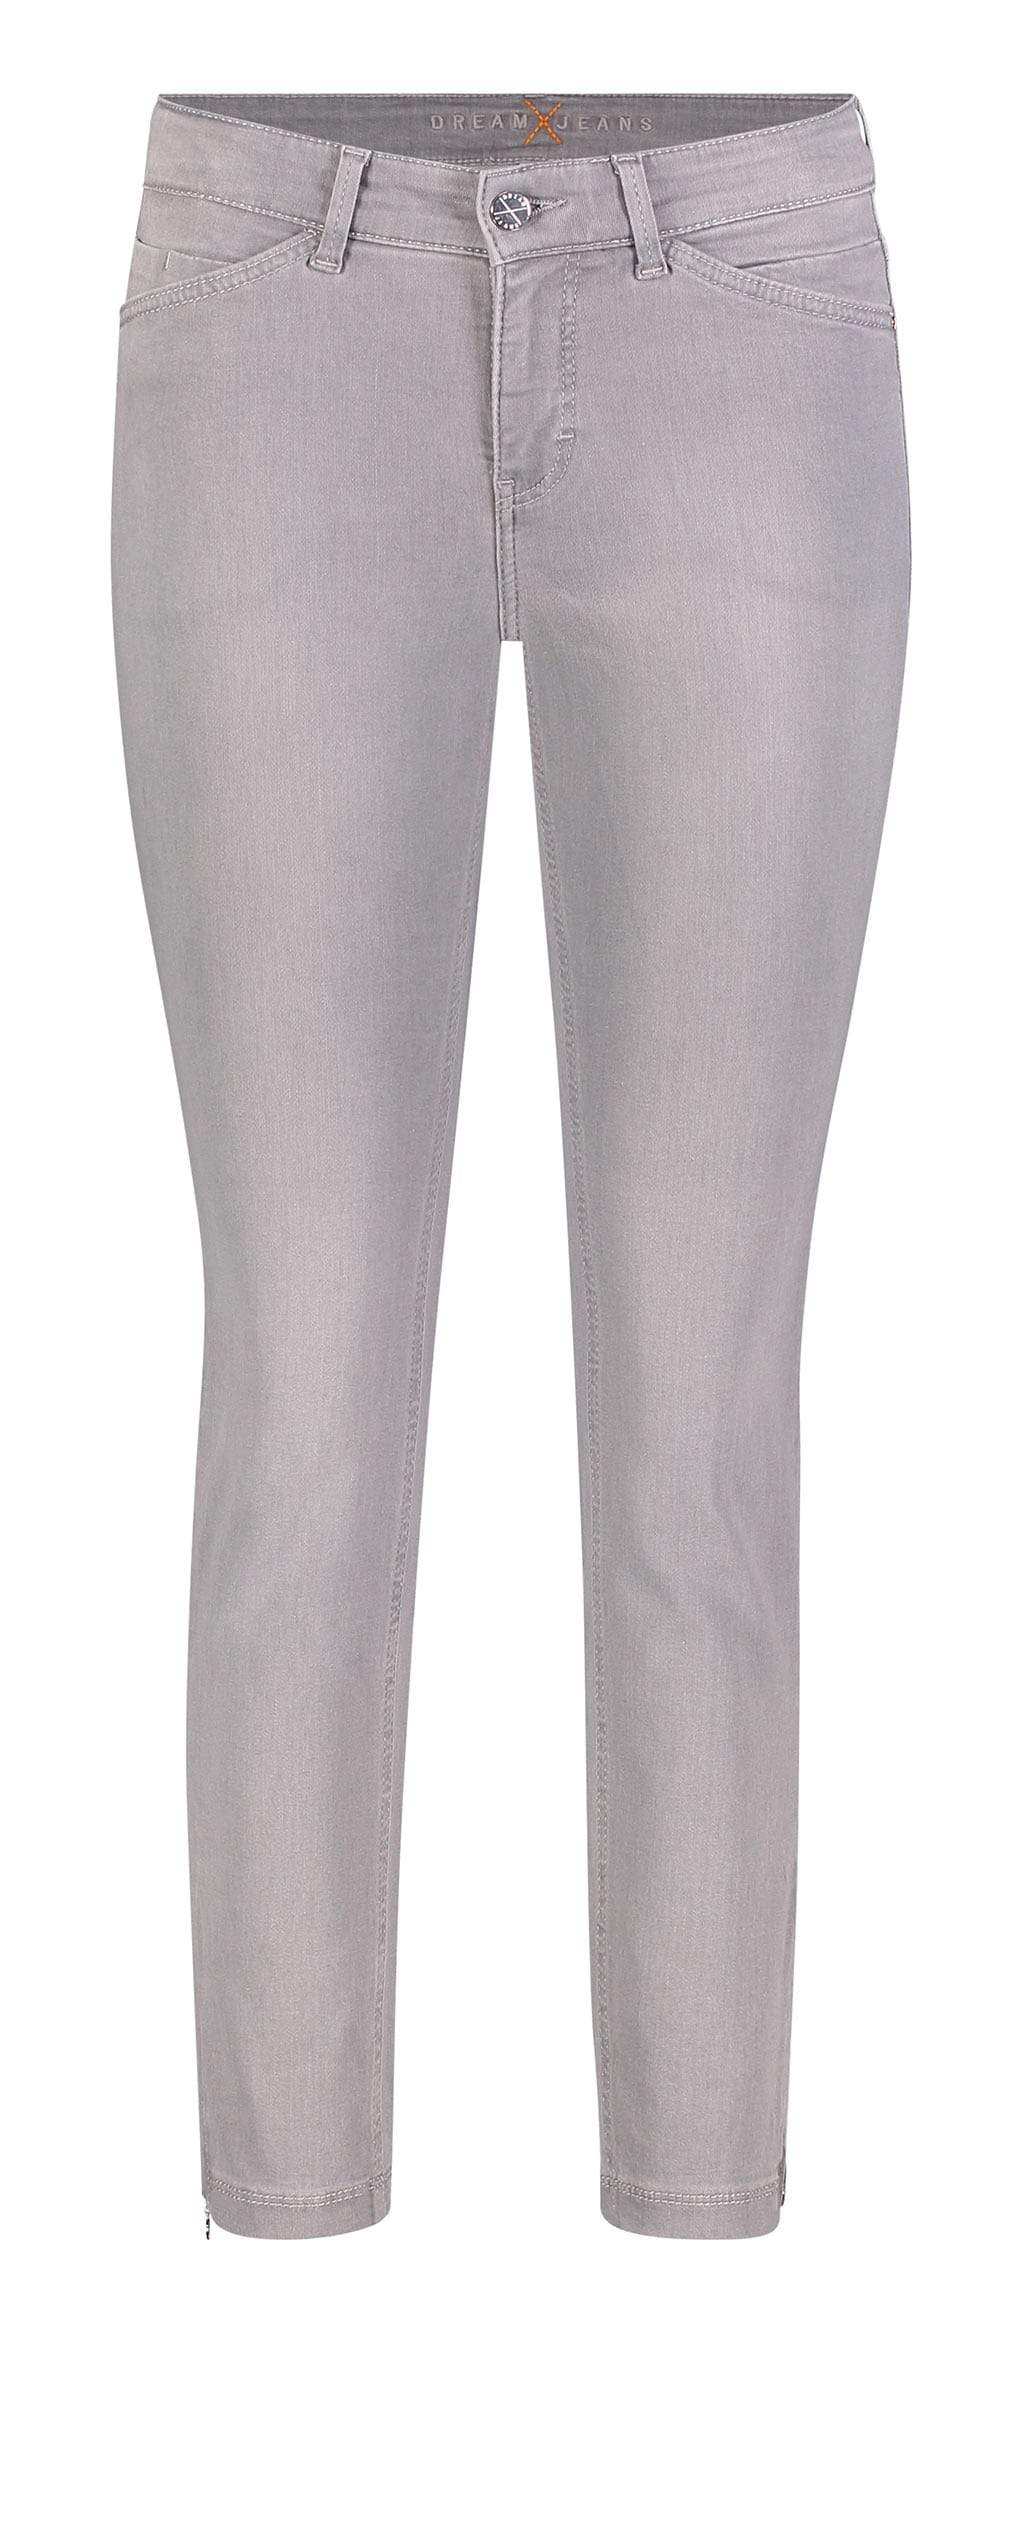 Mac Jeans Jeans Mac Dream Chic Jeans 5471 0355L D310 Silver Grey Used izzi-of-baslow